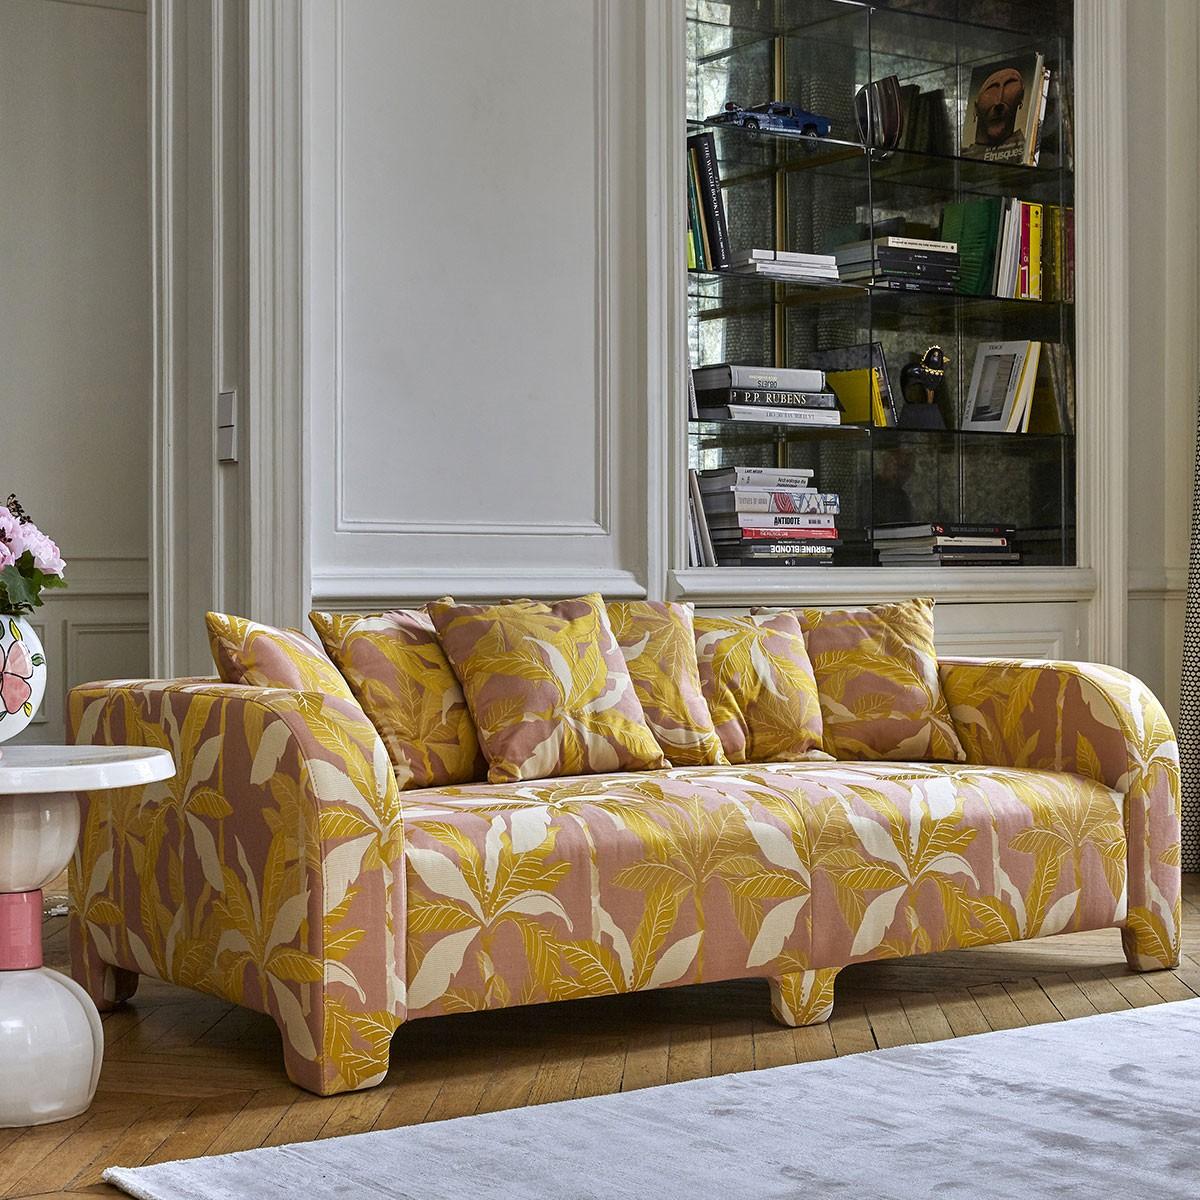 Popus Editions Graziella 2 seater sofa in citrine Marrakech Jacquard fabric

A foot that hides another. A cushion that hides another. A curve that hides another with contemporary lines and a base like a punctuation mark, this sofa gives pride of